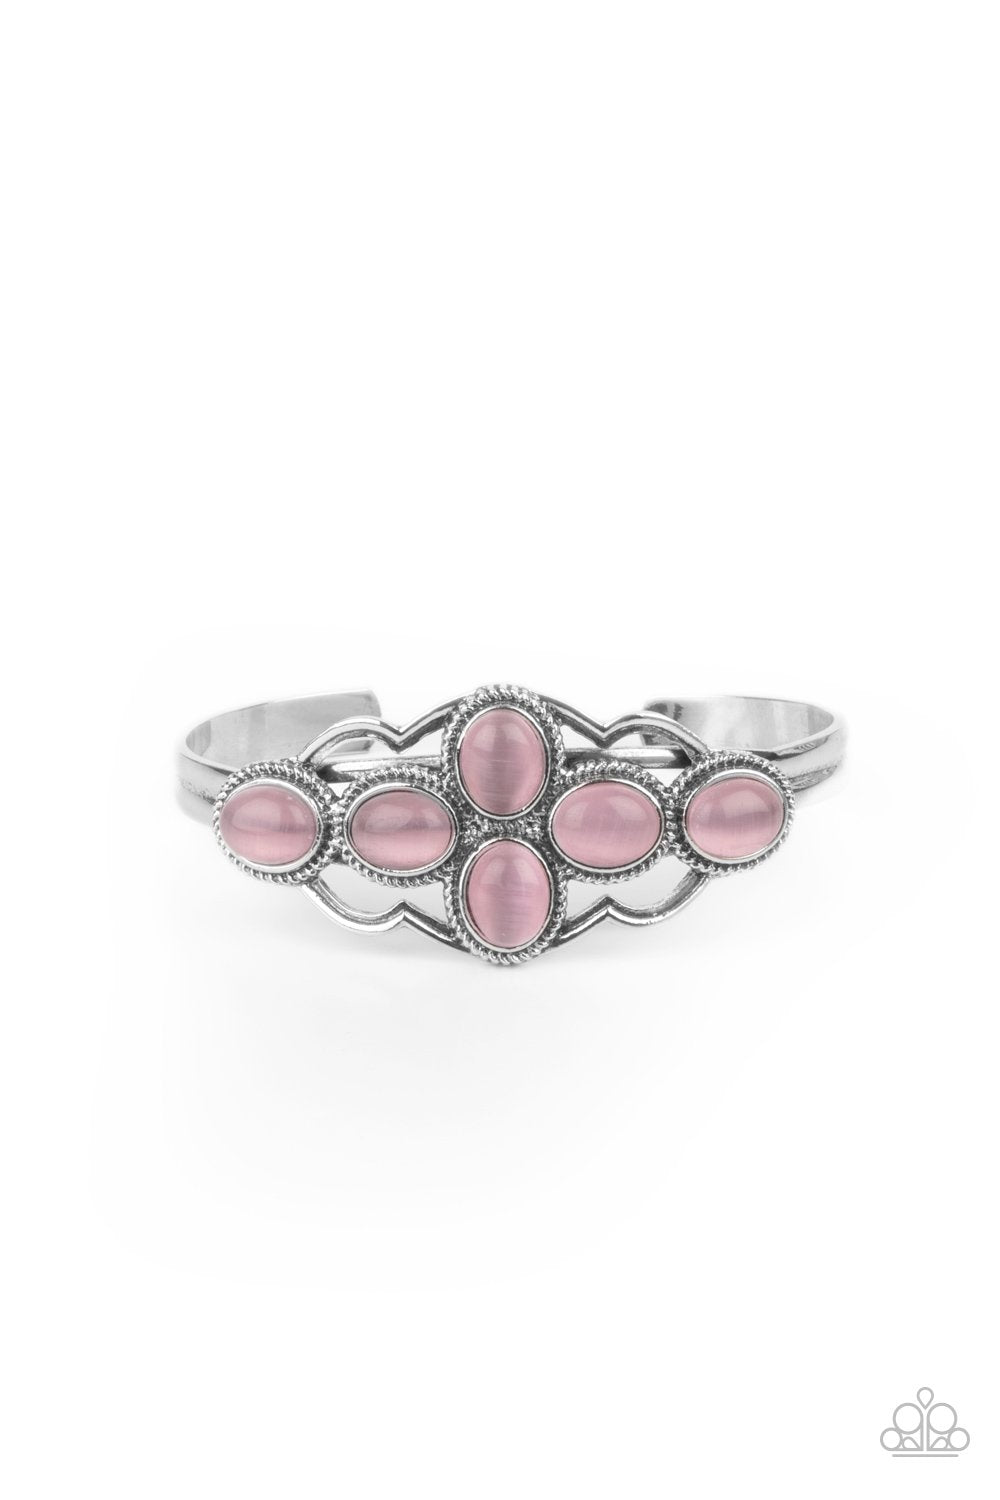 &lt;p&gt;A collection of glowing pink cat\&#039;s eye stones delicately cluster inside a scalloped silver frame, creating an ethereal centerpiece atop a dainty silver cuff.&lt;/p&gt;
 
 &lt;p&gt;&lt;i&gt; Sold as one individual bracelet.&lt;/i&gt;&lt;/p&gt;
 
 
 &lt;img src=\&quot;https://d9b54x484lq62.cloudfront.net/paparazzi/shopping/images/517_tag150x115_1.png\&quot; alt=\&quot;New Kit\&quot; align=\&quot;middle\&quot; height=\&quot;50\&quot; width=\&quot;50\&quot;&gt;